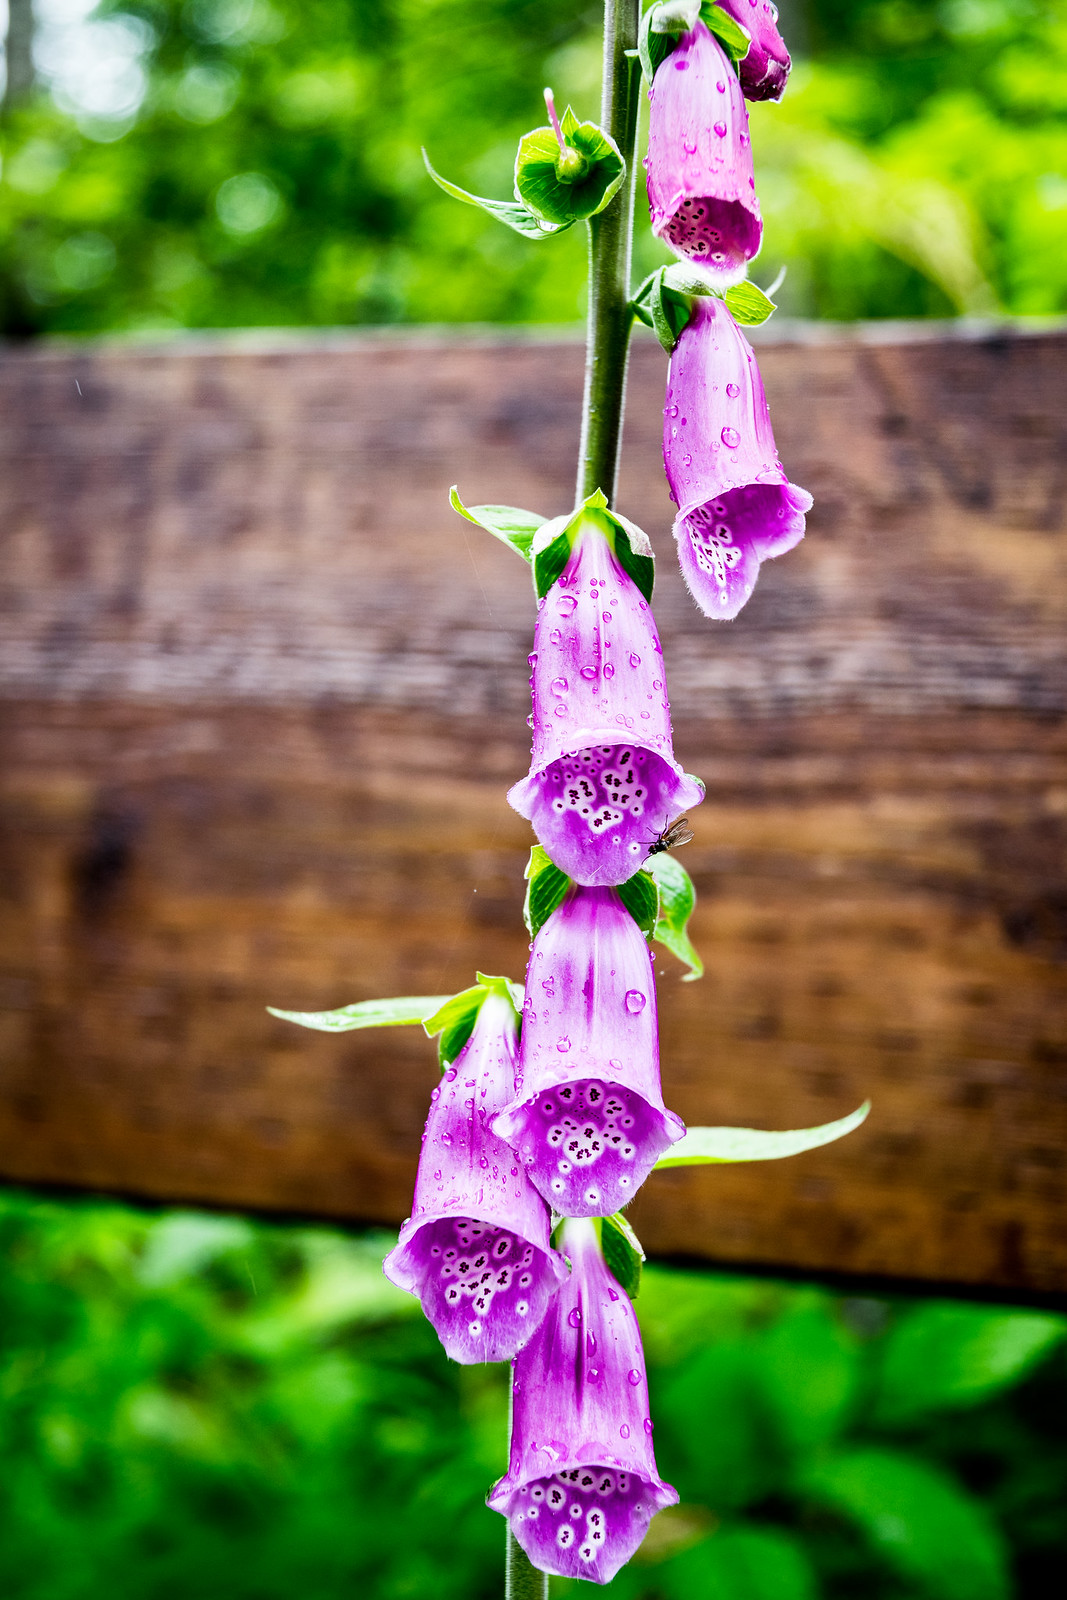 purple foxglove was blooming all over town